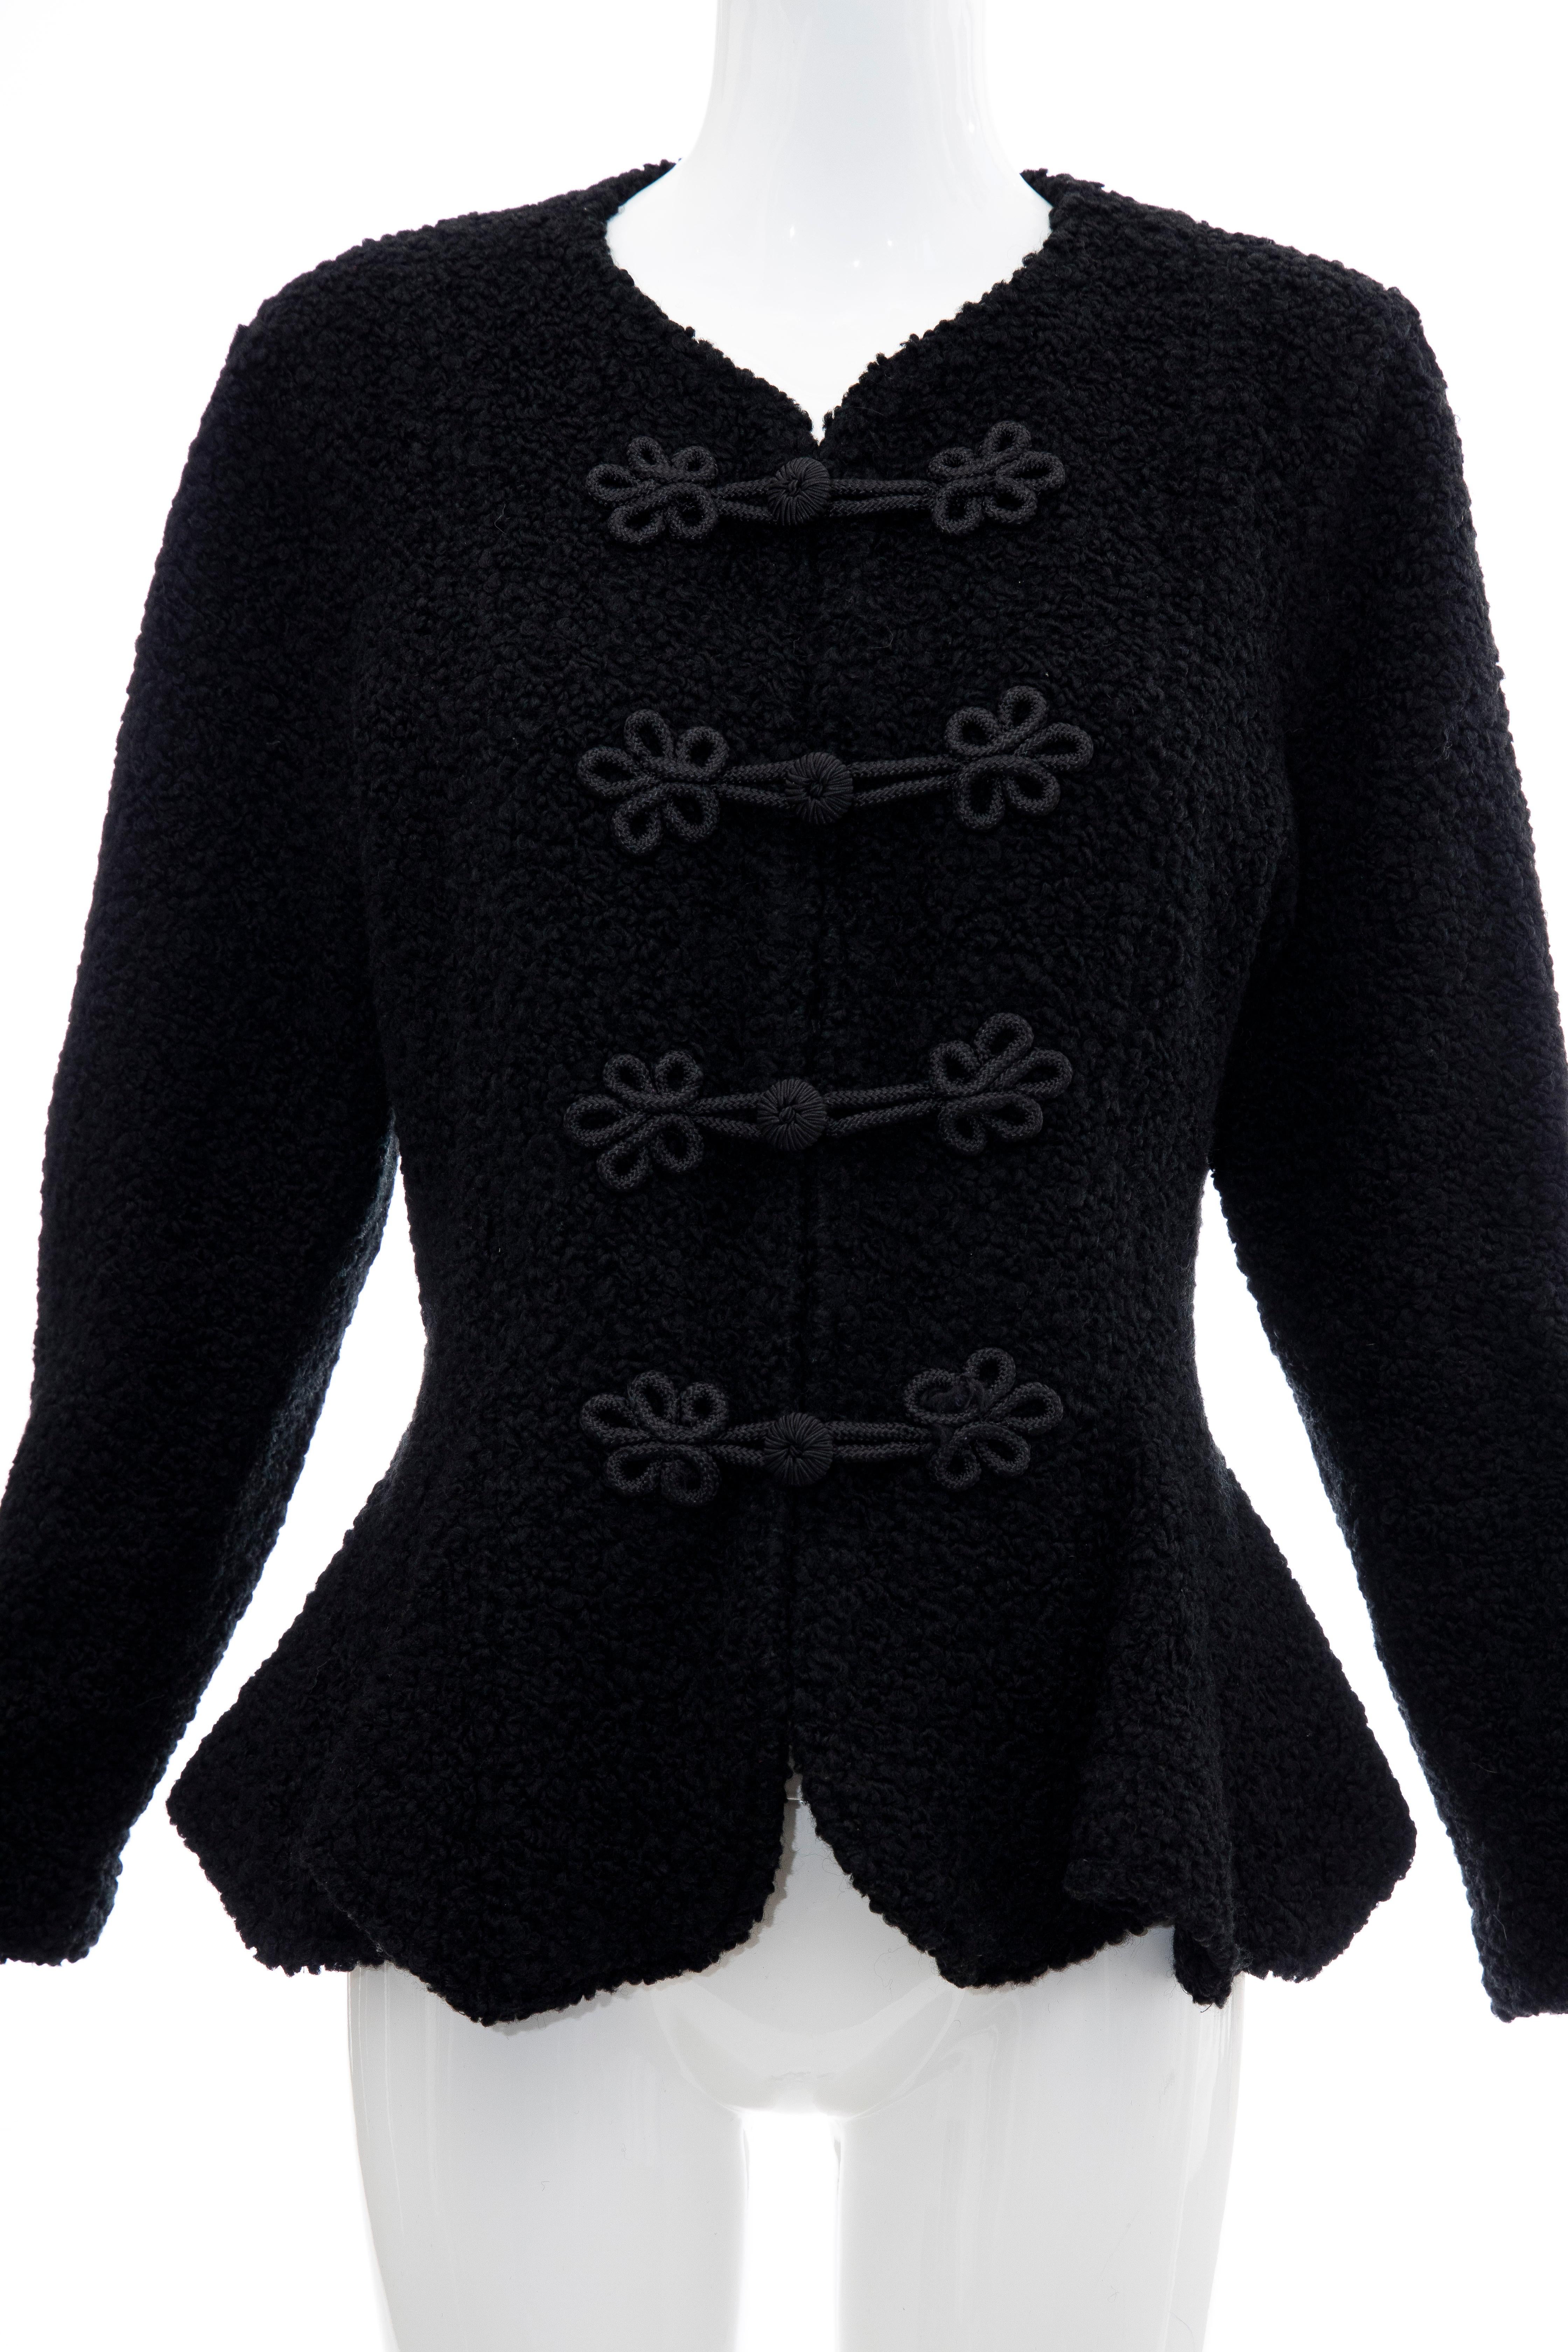 Jean Muir Studio black faux persian lamb jacket with frog style closure. 

No Size Label

Bust: 38, Waist: 33, Shoulder: 16, Sleeve: 21.5, Length: 25